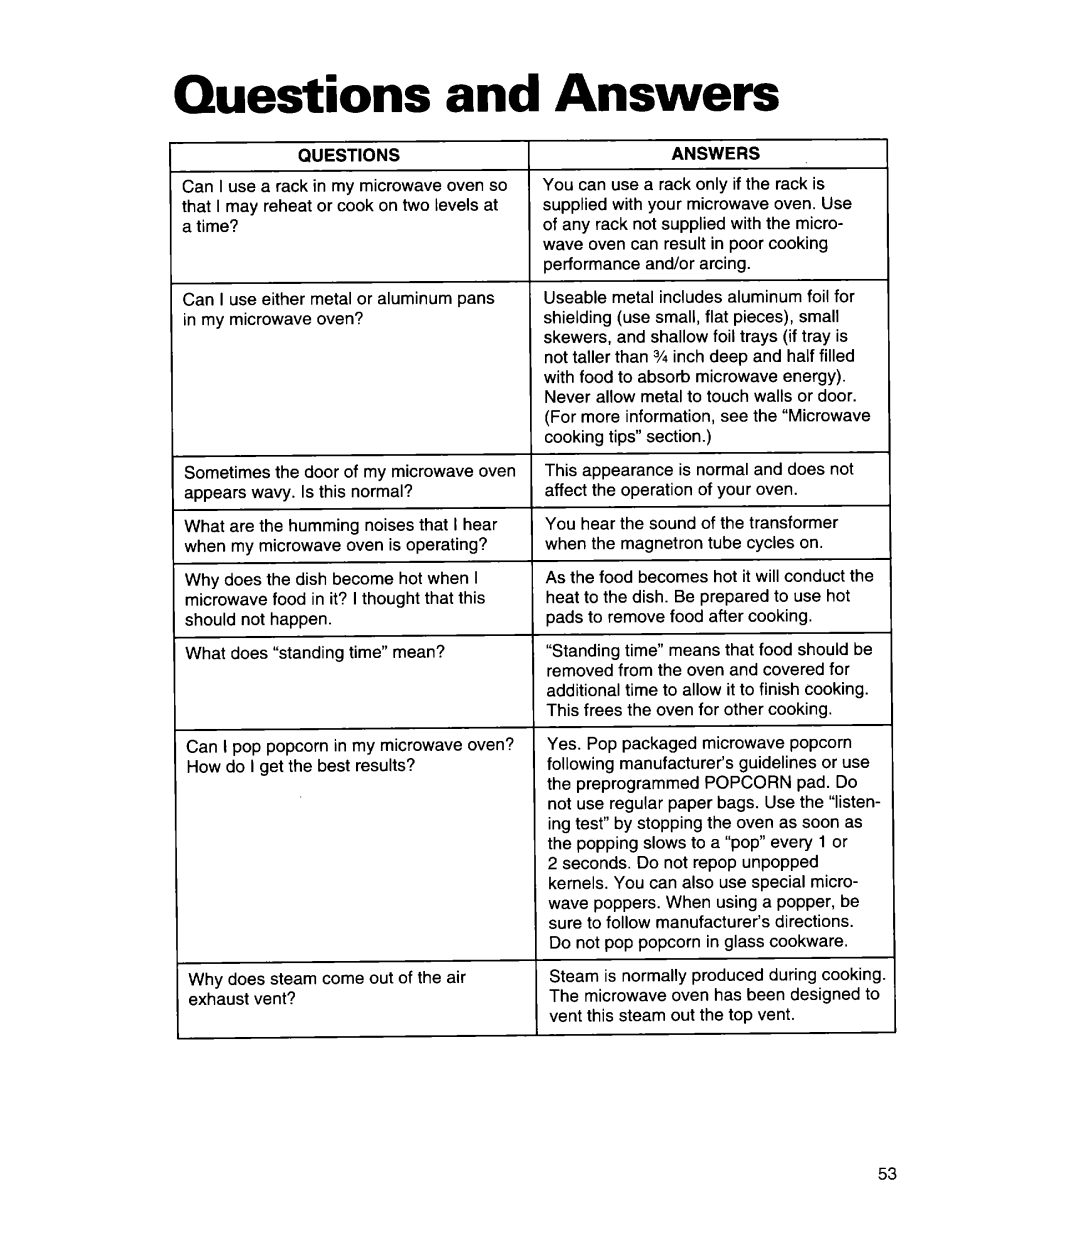 Whirlpool MH7130XE warranty Questions and Answers, Questionsanswers 